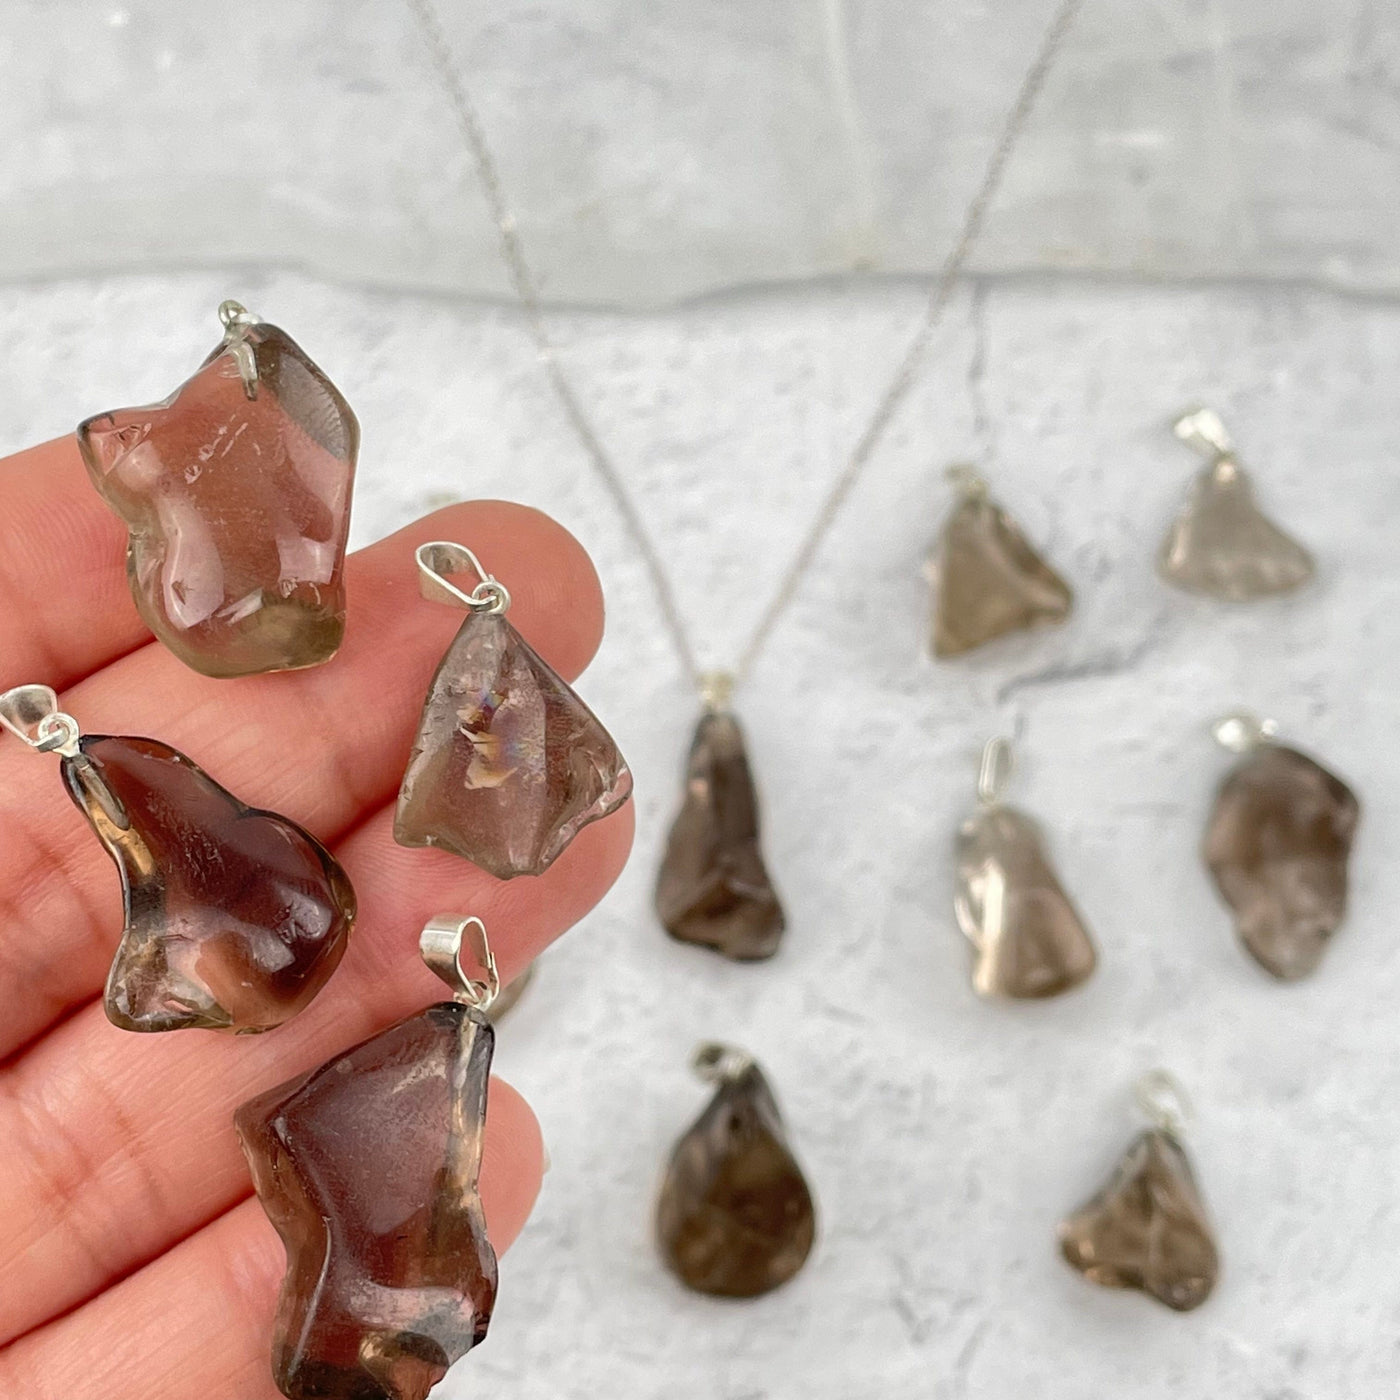 multiple smokey quartz pendants in hand for size reference 